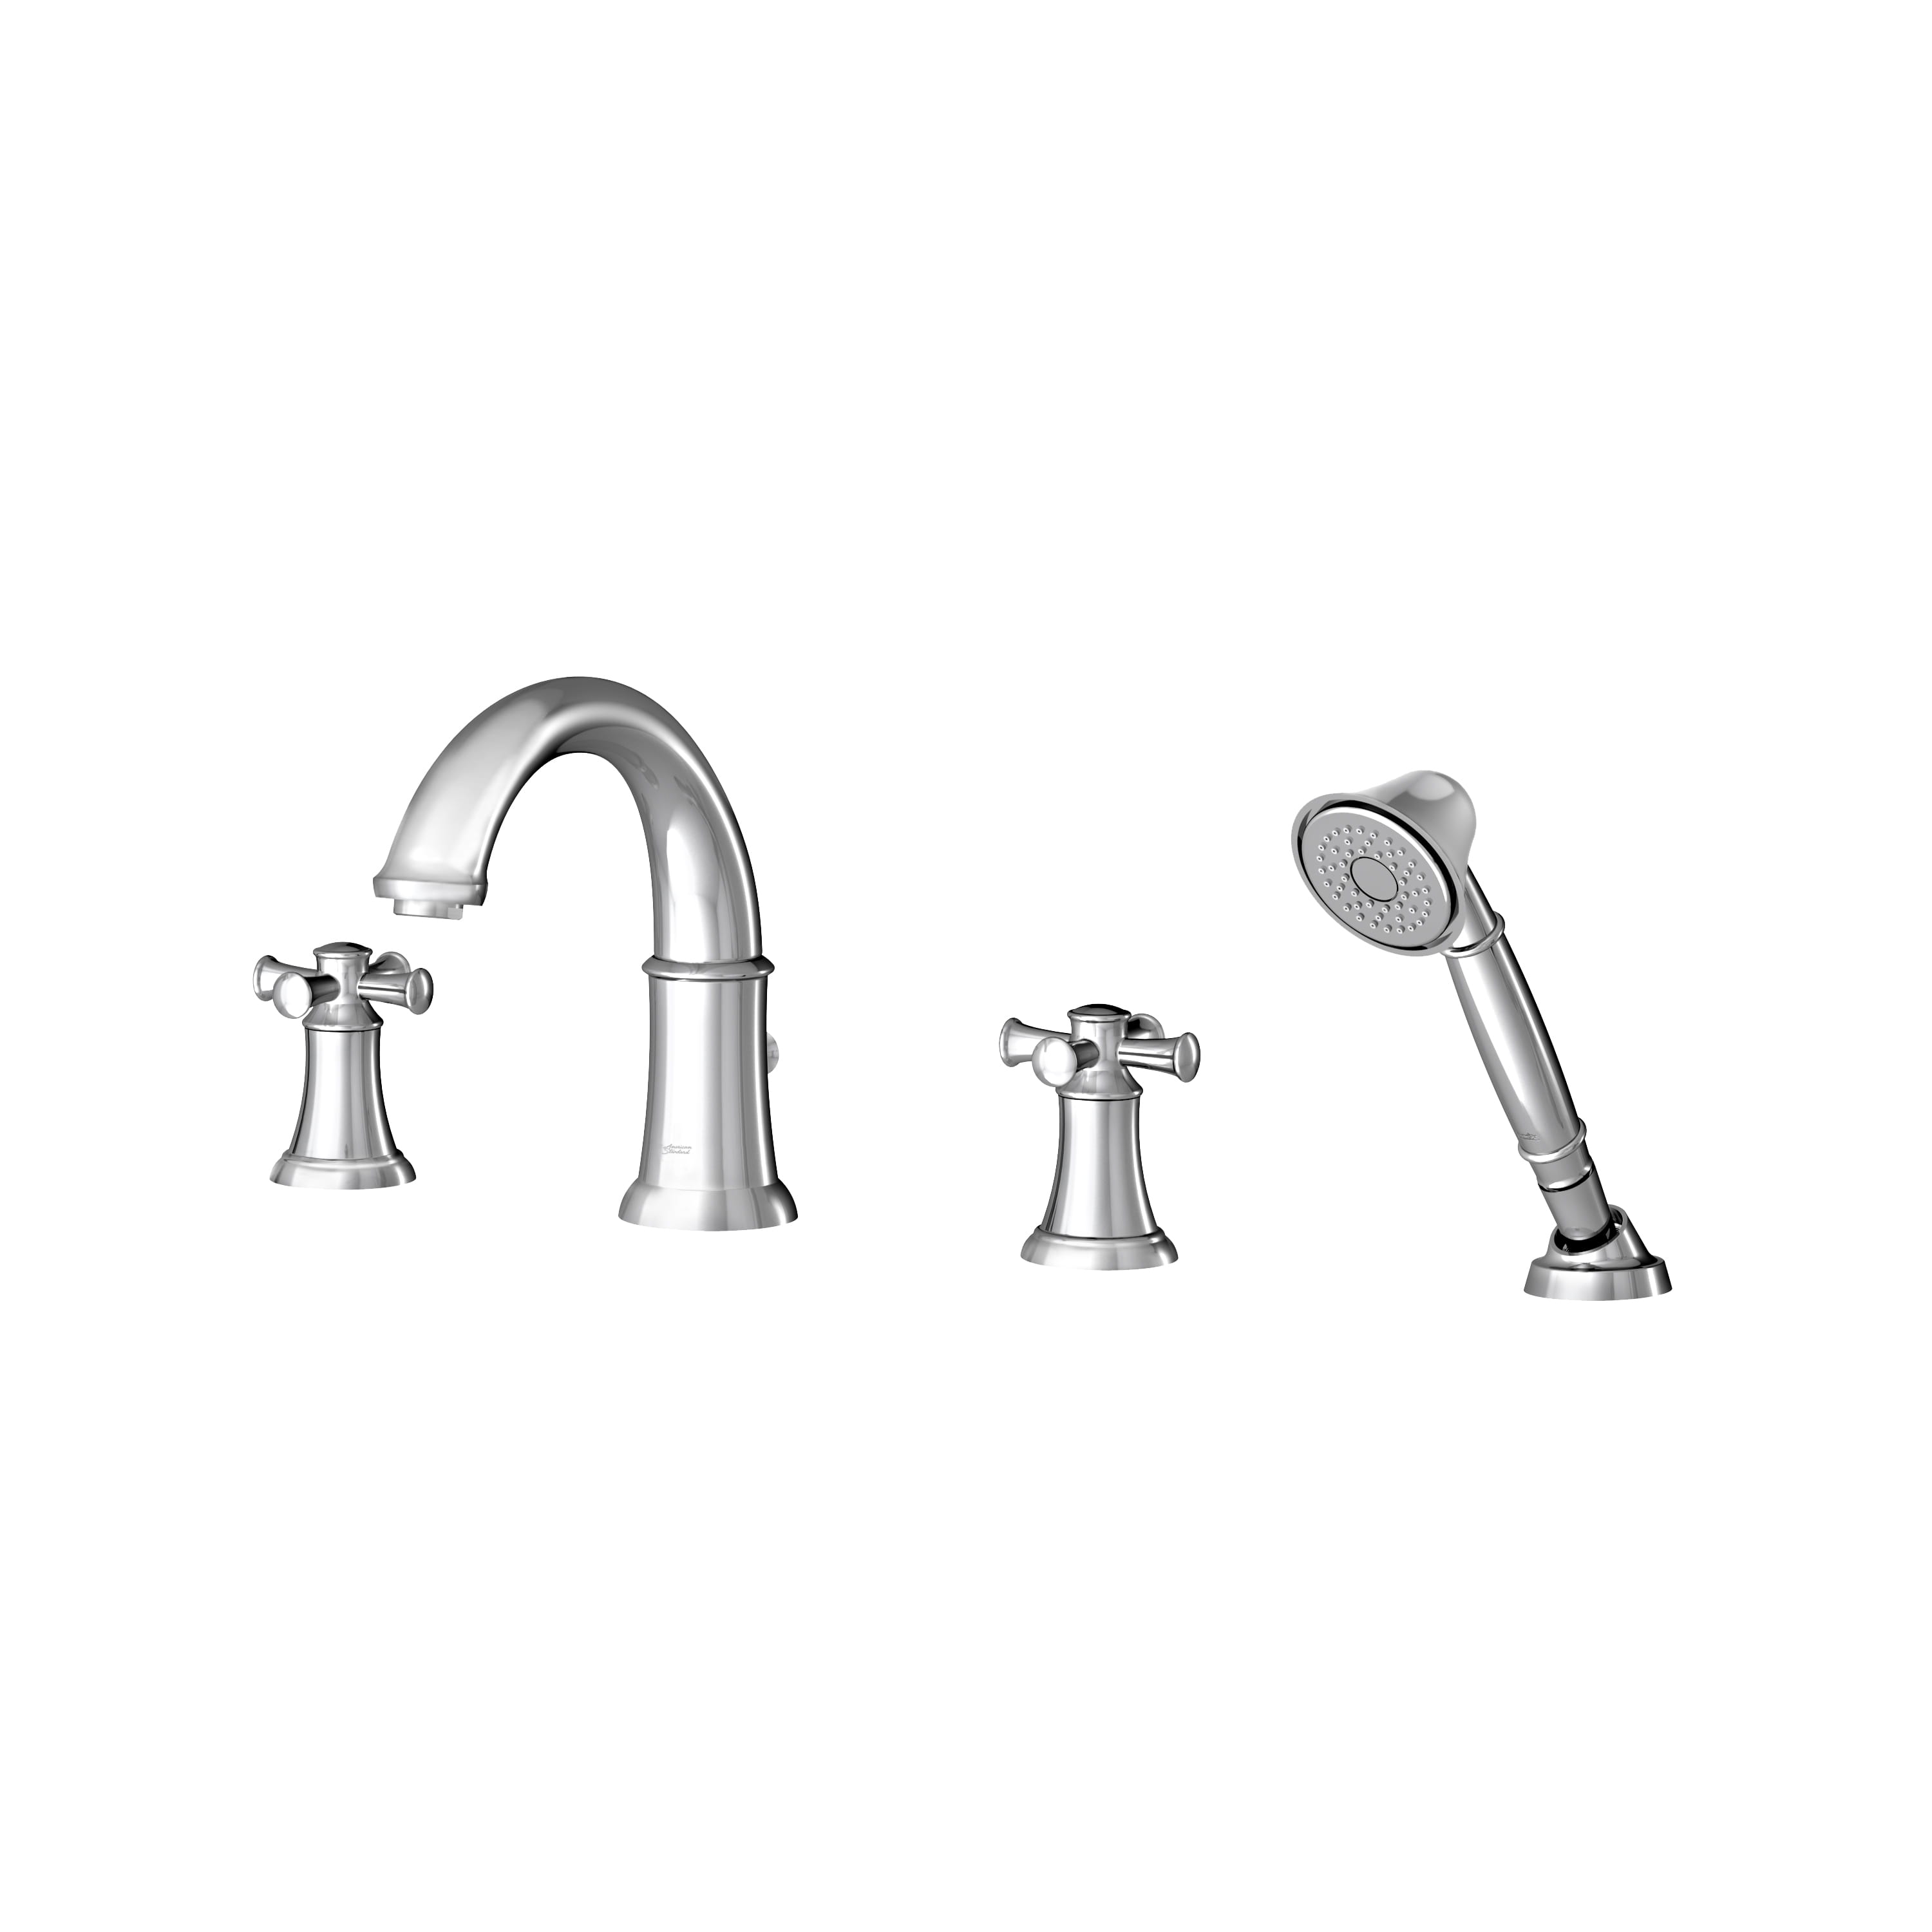 Portsmouth Bathtub Faucet with Personal Shower for Flash Rough in Valve with Cross Handles CHROME